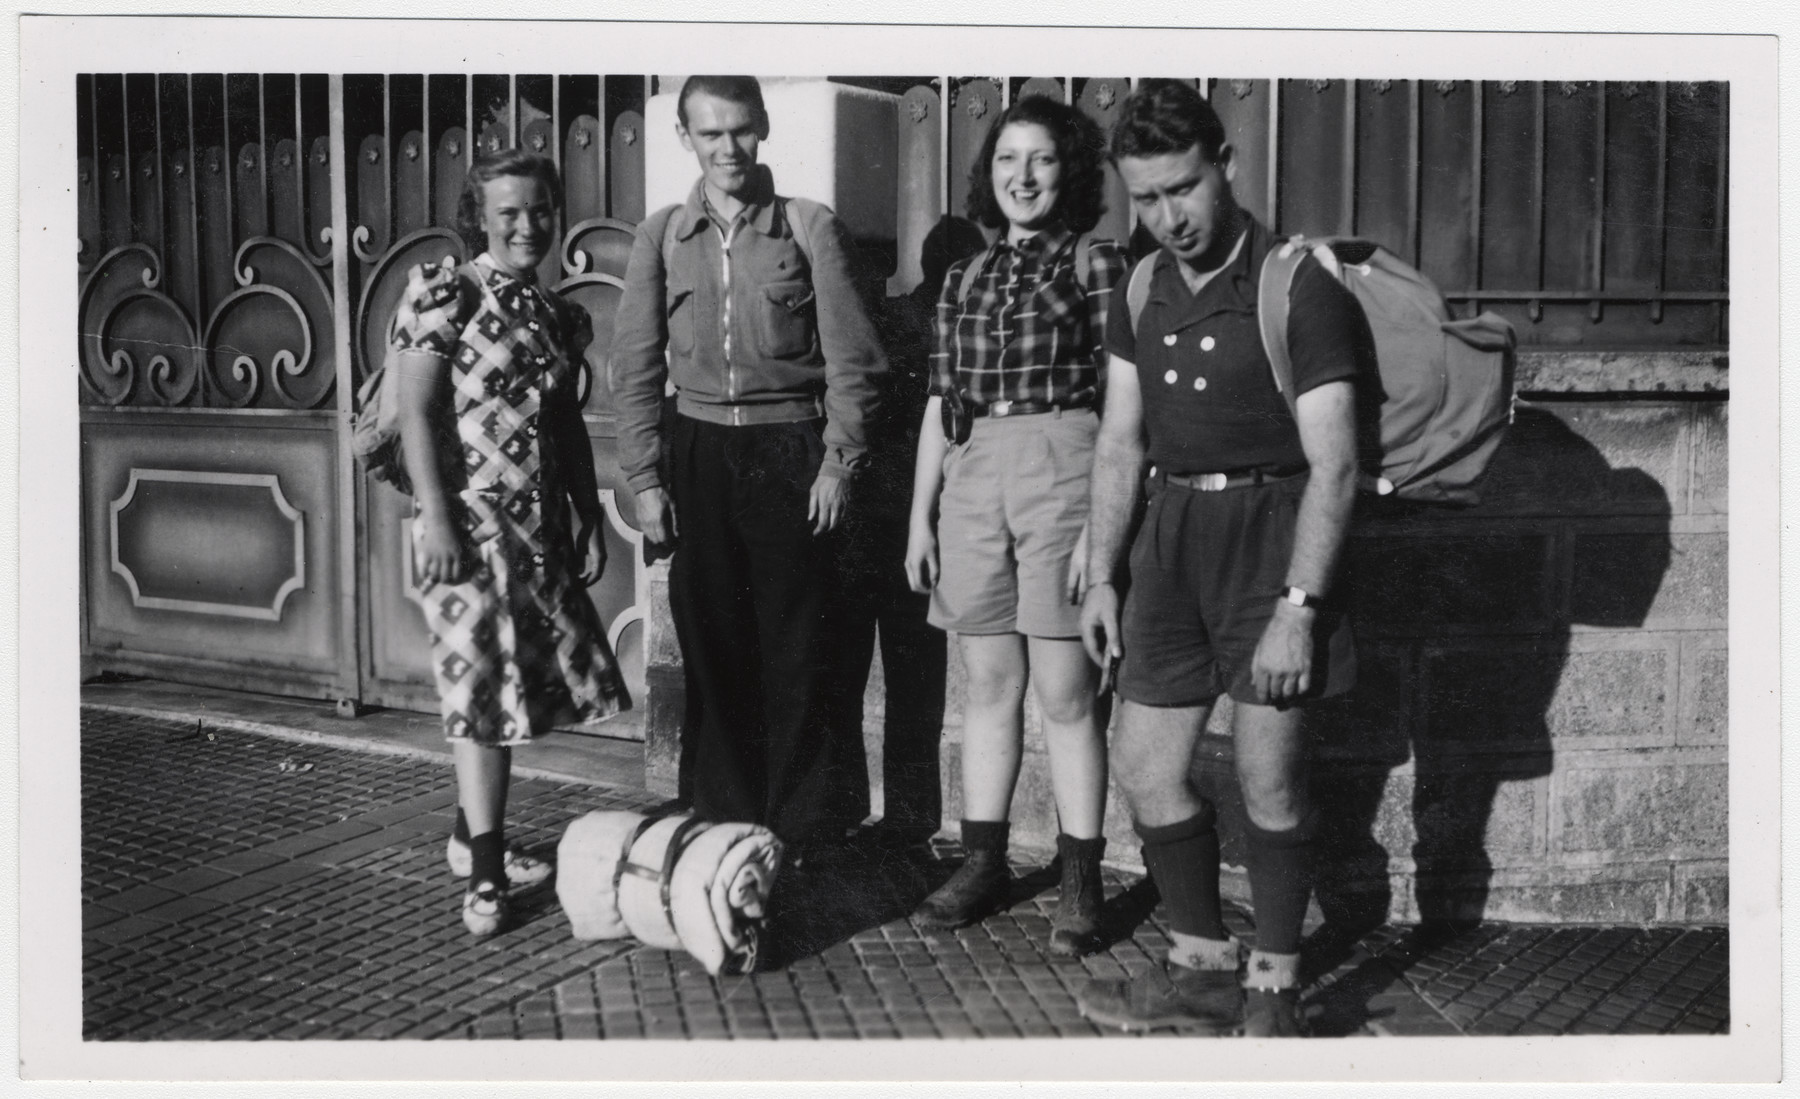 Four young people pose together with their backpacks and sleeping bags.  

Henri Moskow is pictured on the far right.